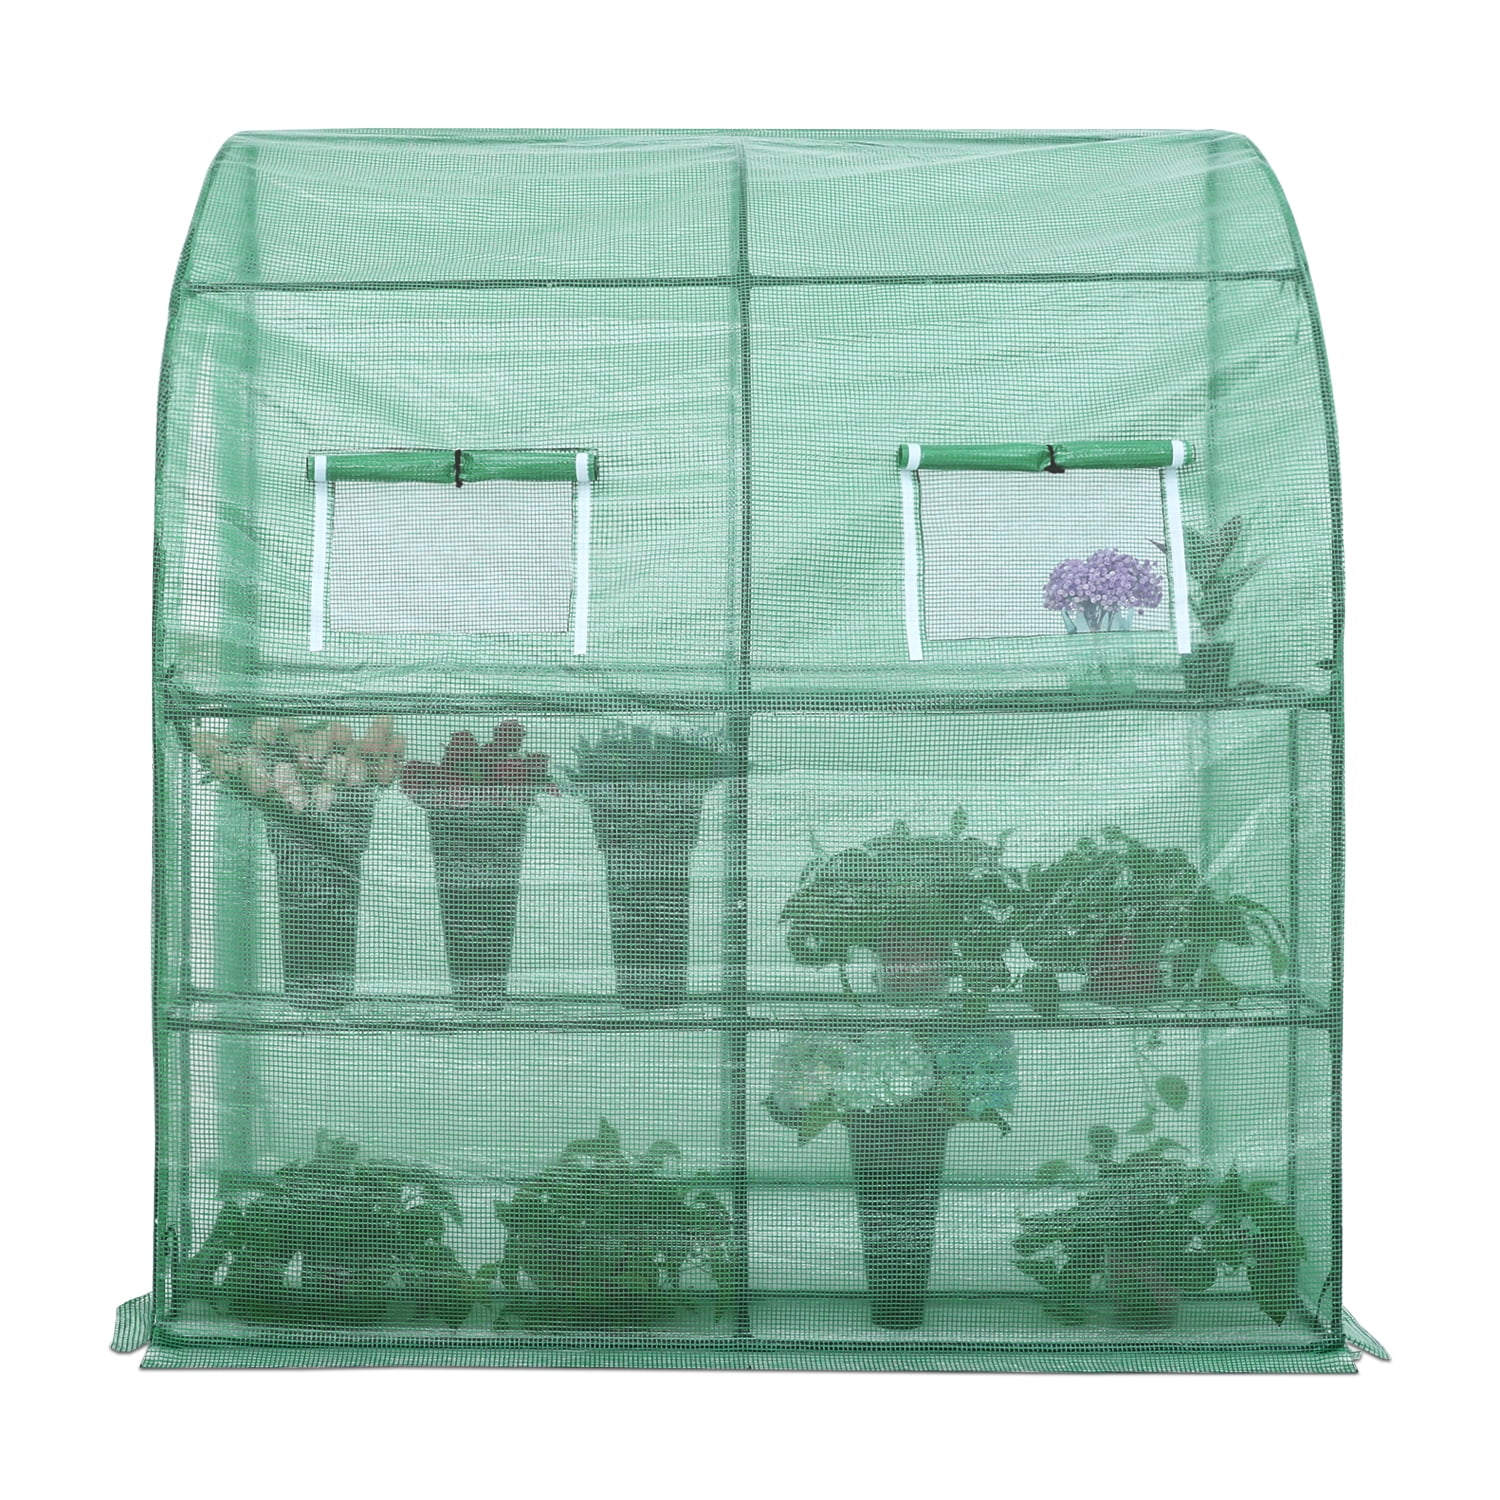 Portable Gardening Greenhouse for Indoor Outdoor with 2 Tier 4 Shelves ABCCANOPY Lean-to Walk-in Greenhouse Green PE Cover 